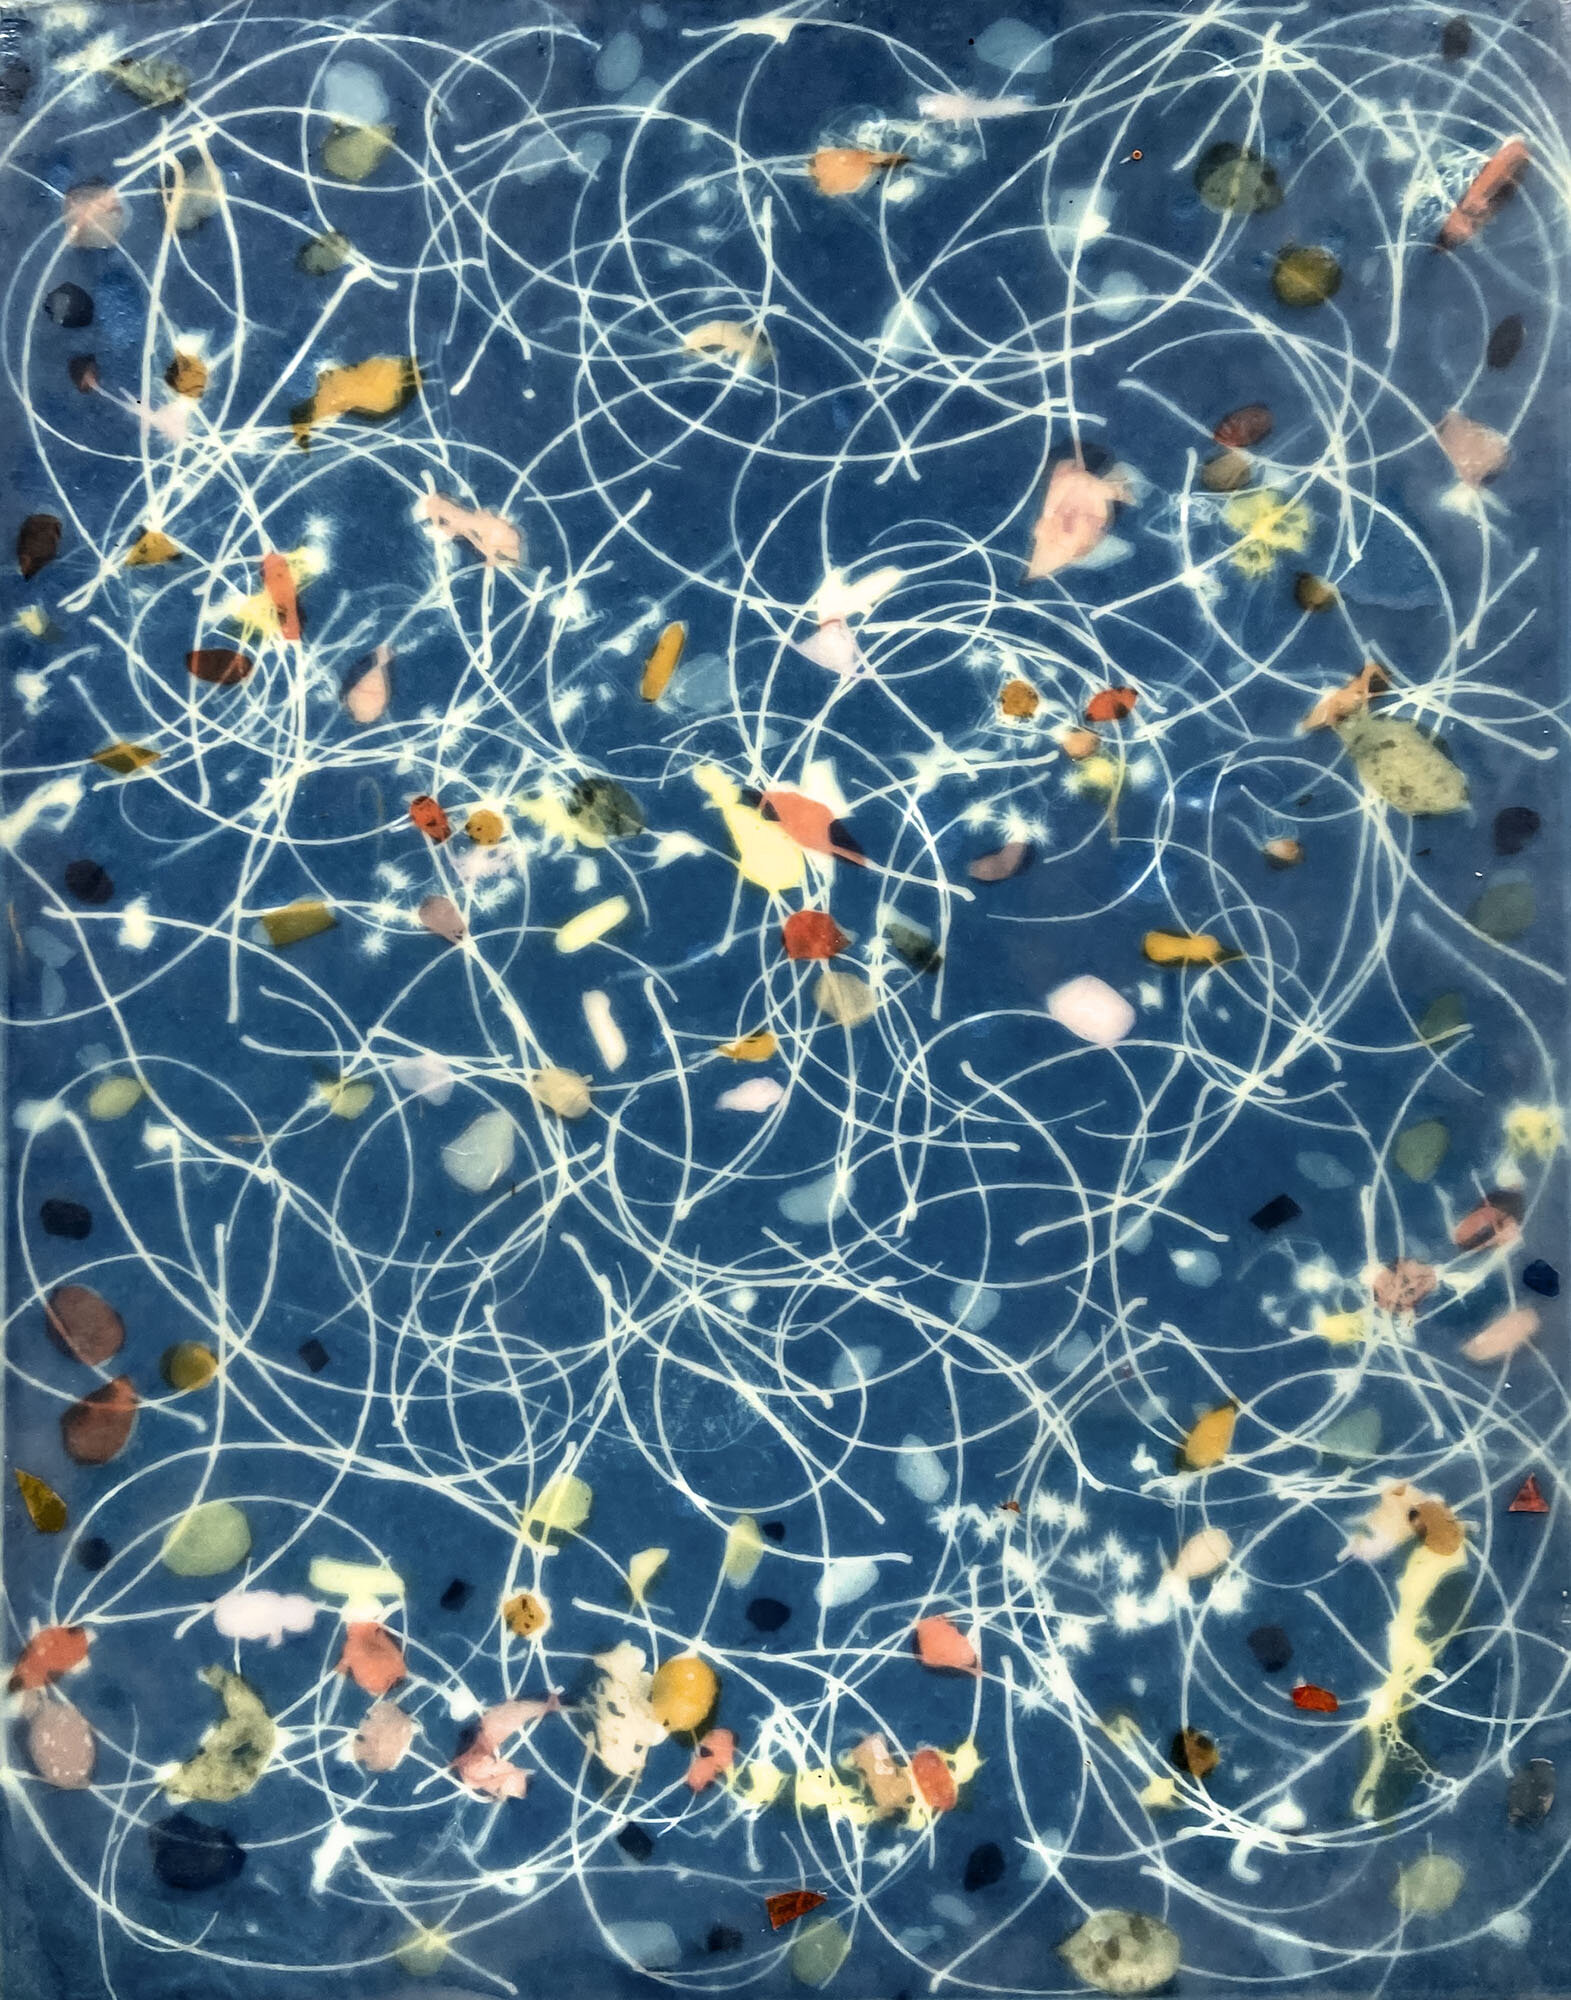   Tobago Tides II,  2020  Cyanotype on Japanese rice paper, colored Japanese rice papers, wax, encaustic board   11” x 14” 